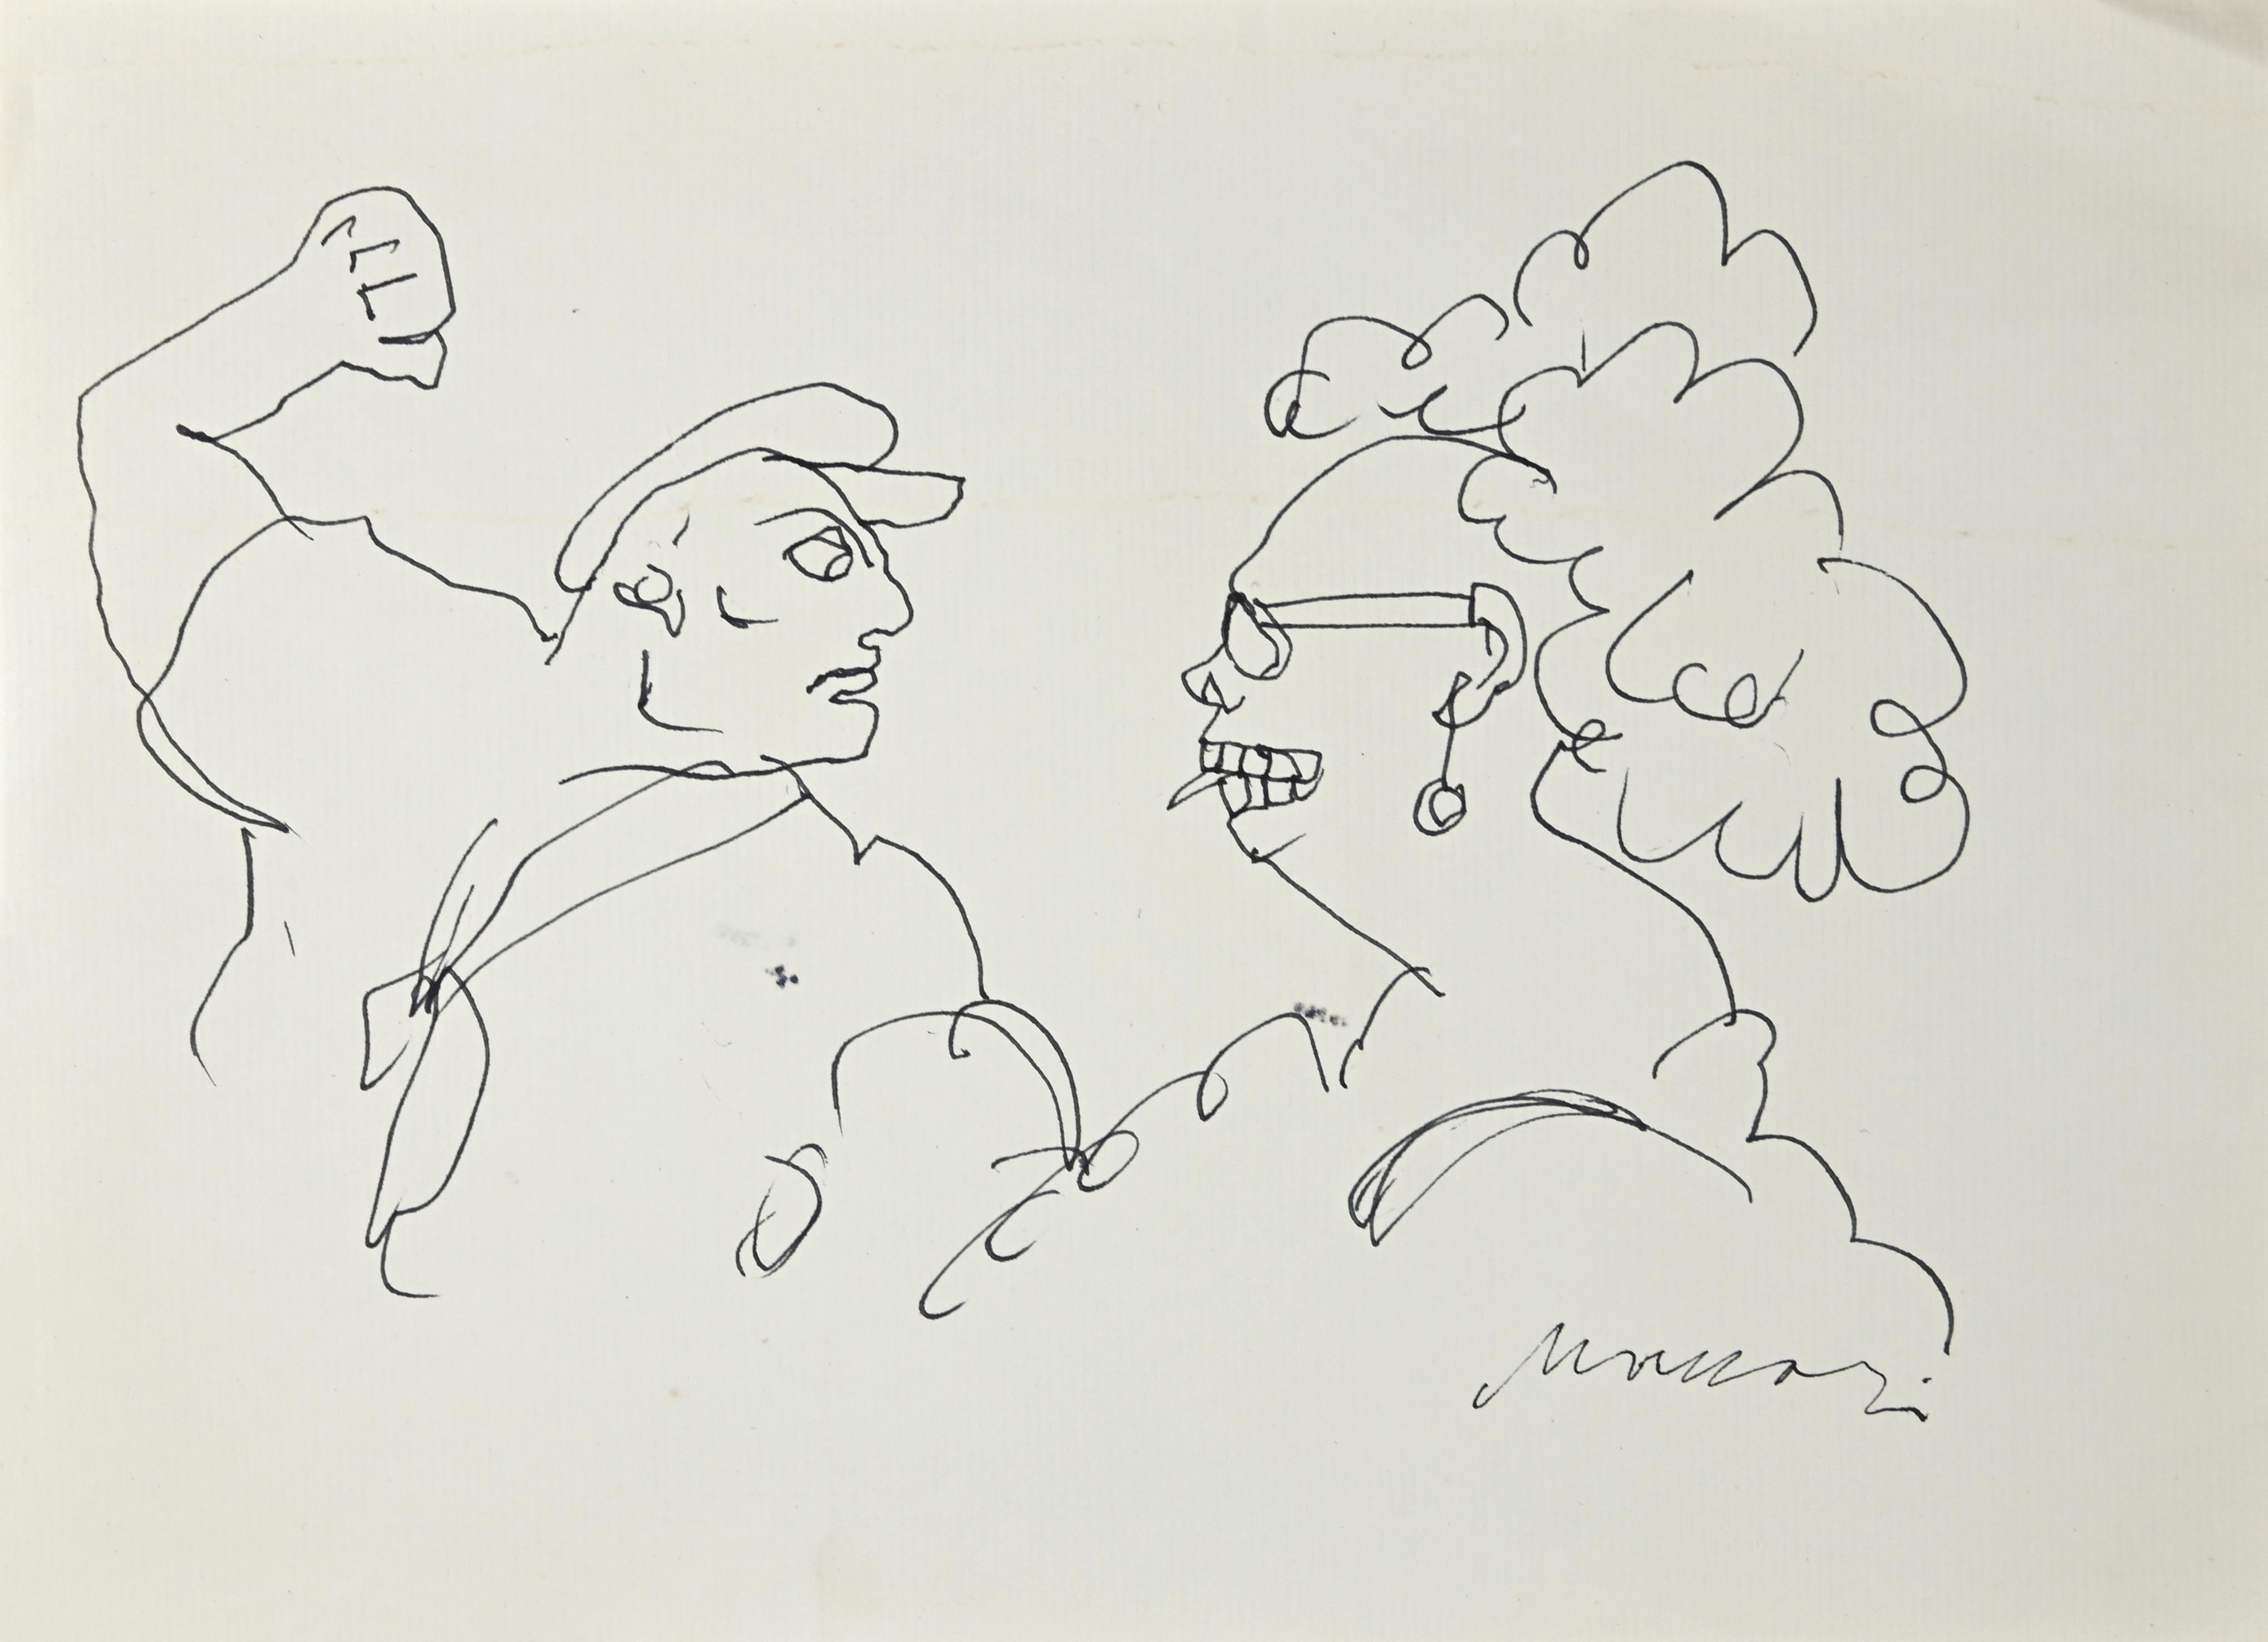 "The Couple"  is original drawings in pen on ivory paper realized by Mino Maccari (1898-1989).

Hand-signed, dated at the lower left.

In good conditions.

Mino Maccari (1898-1989): Italian writer, painter, engraver and journalist, winner of the